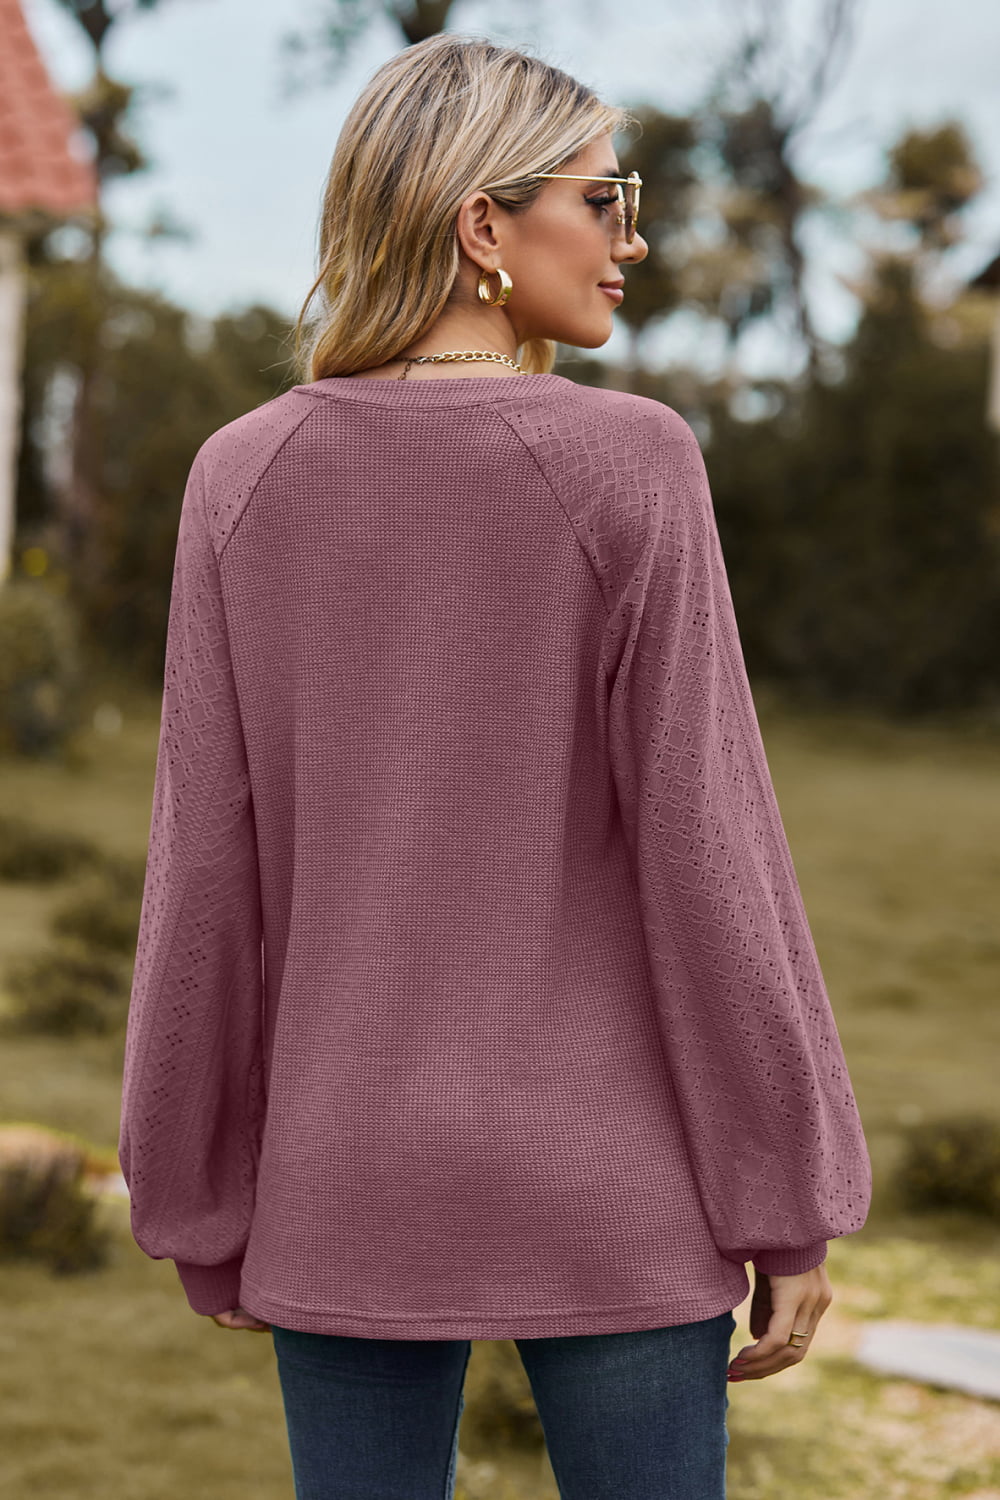 Notched Neck Raglan Sleeve Blouse - Women’s Clothing & Accessories - Shirts & Tops - 2 - 2024